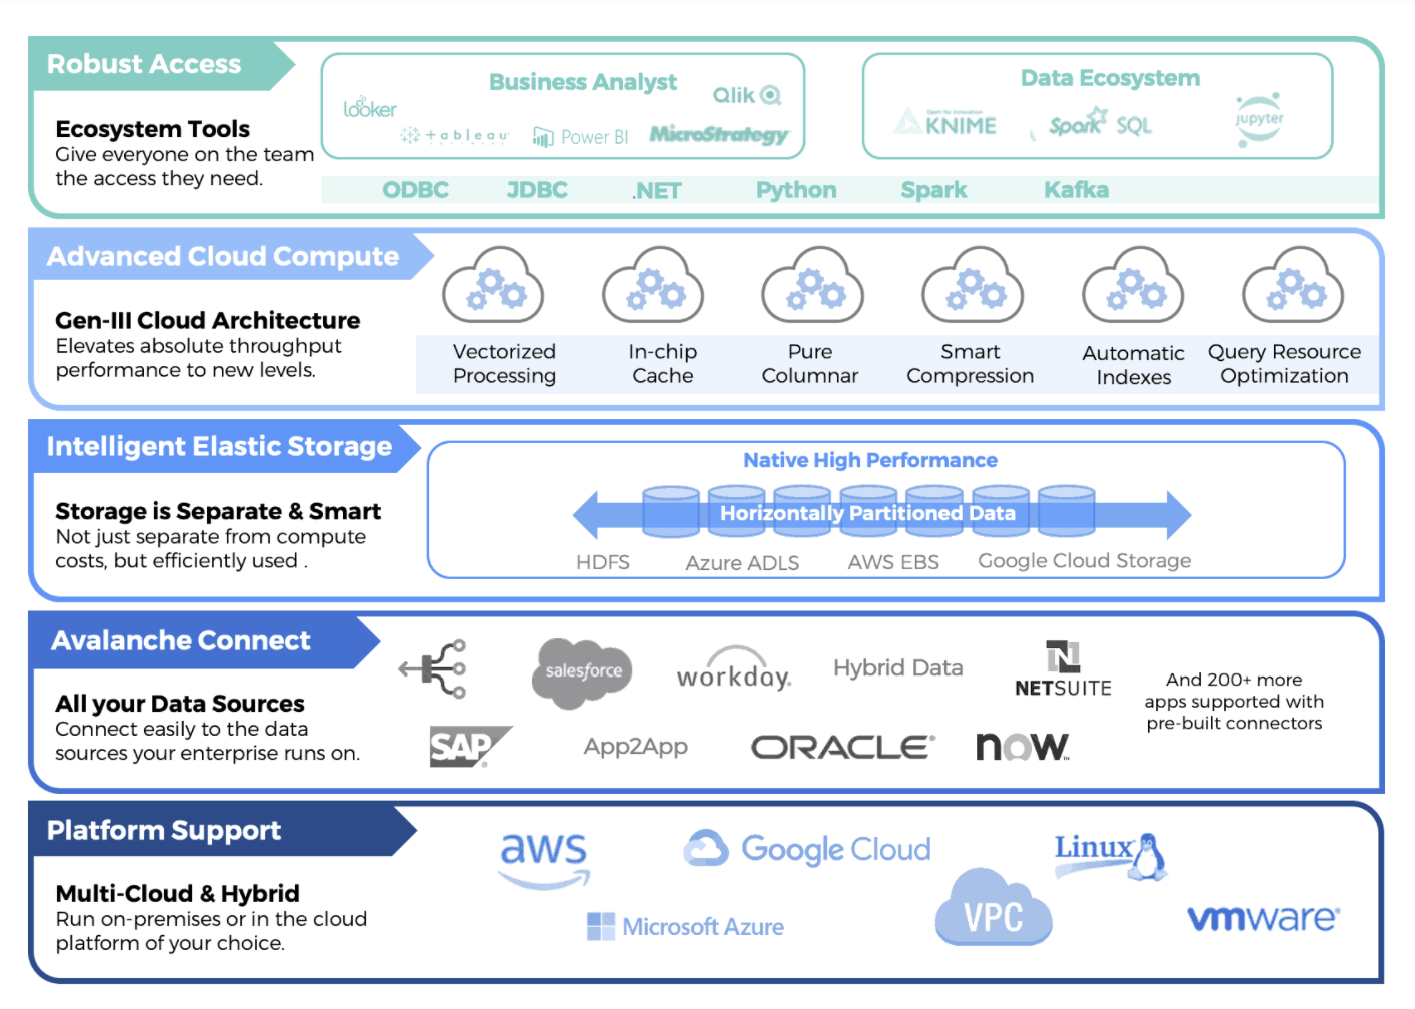 Actian Data Platform architecture offers robust access, advanced cloud compute, intelligent elastic storage, connection to multiple data sources, and platform support.